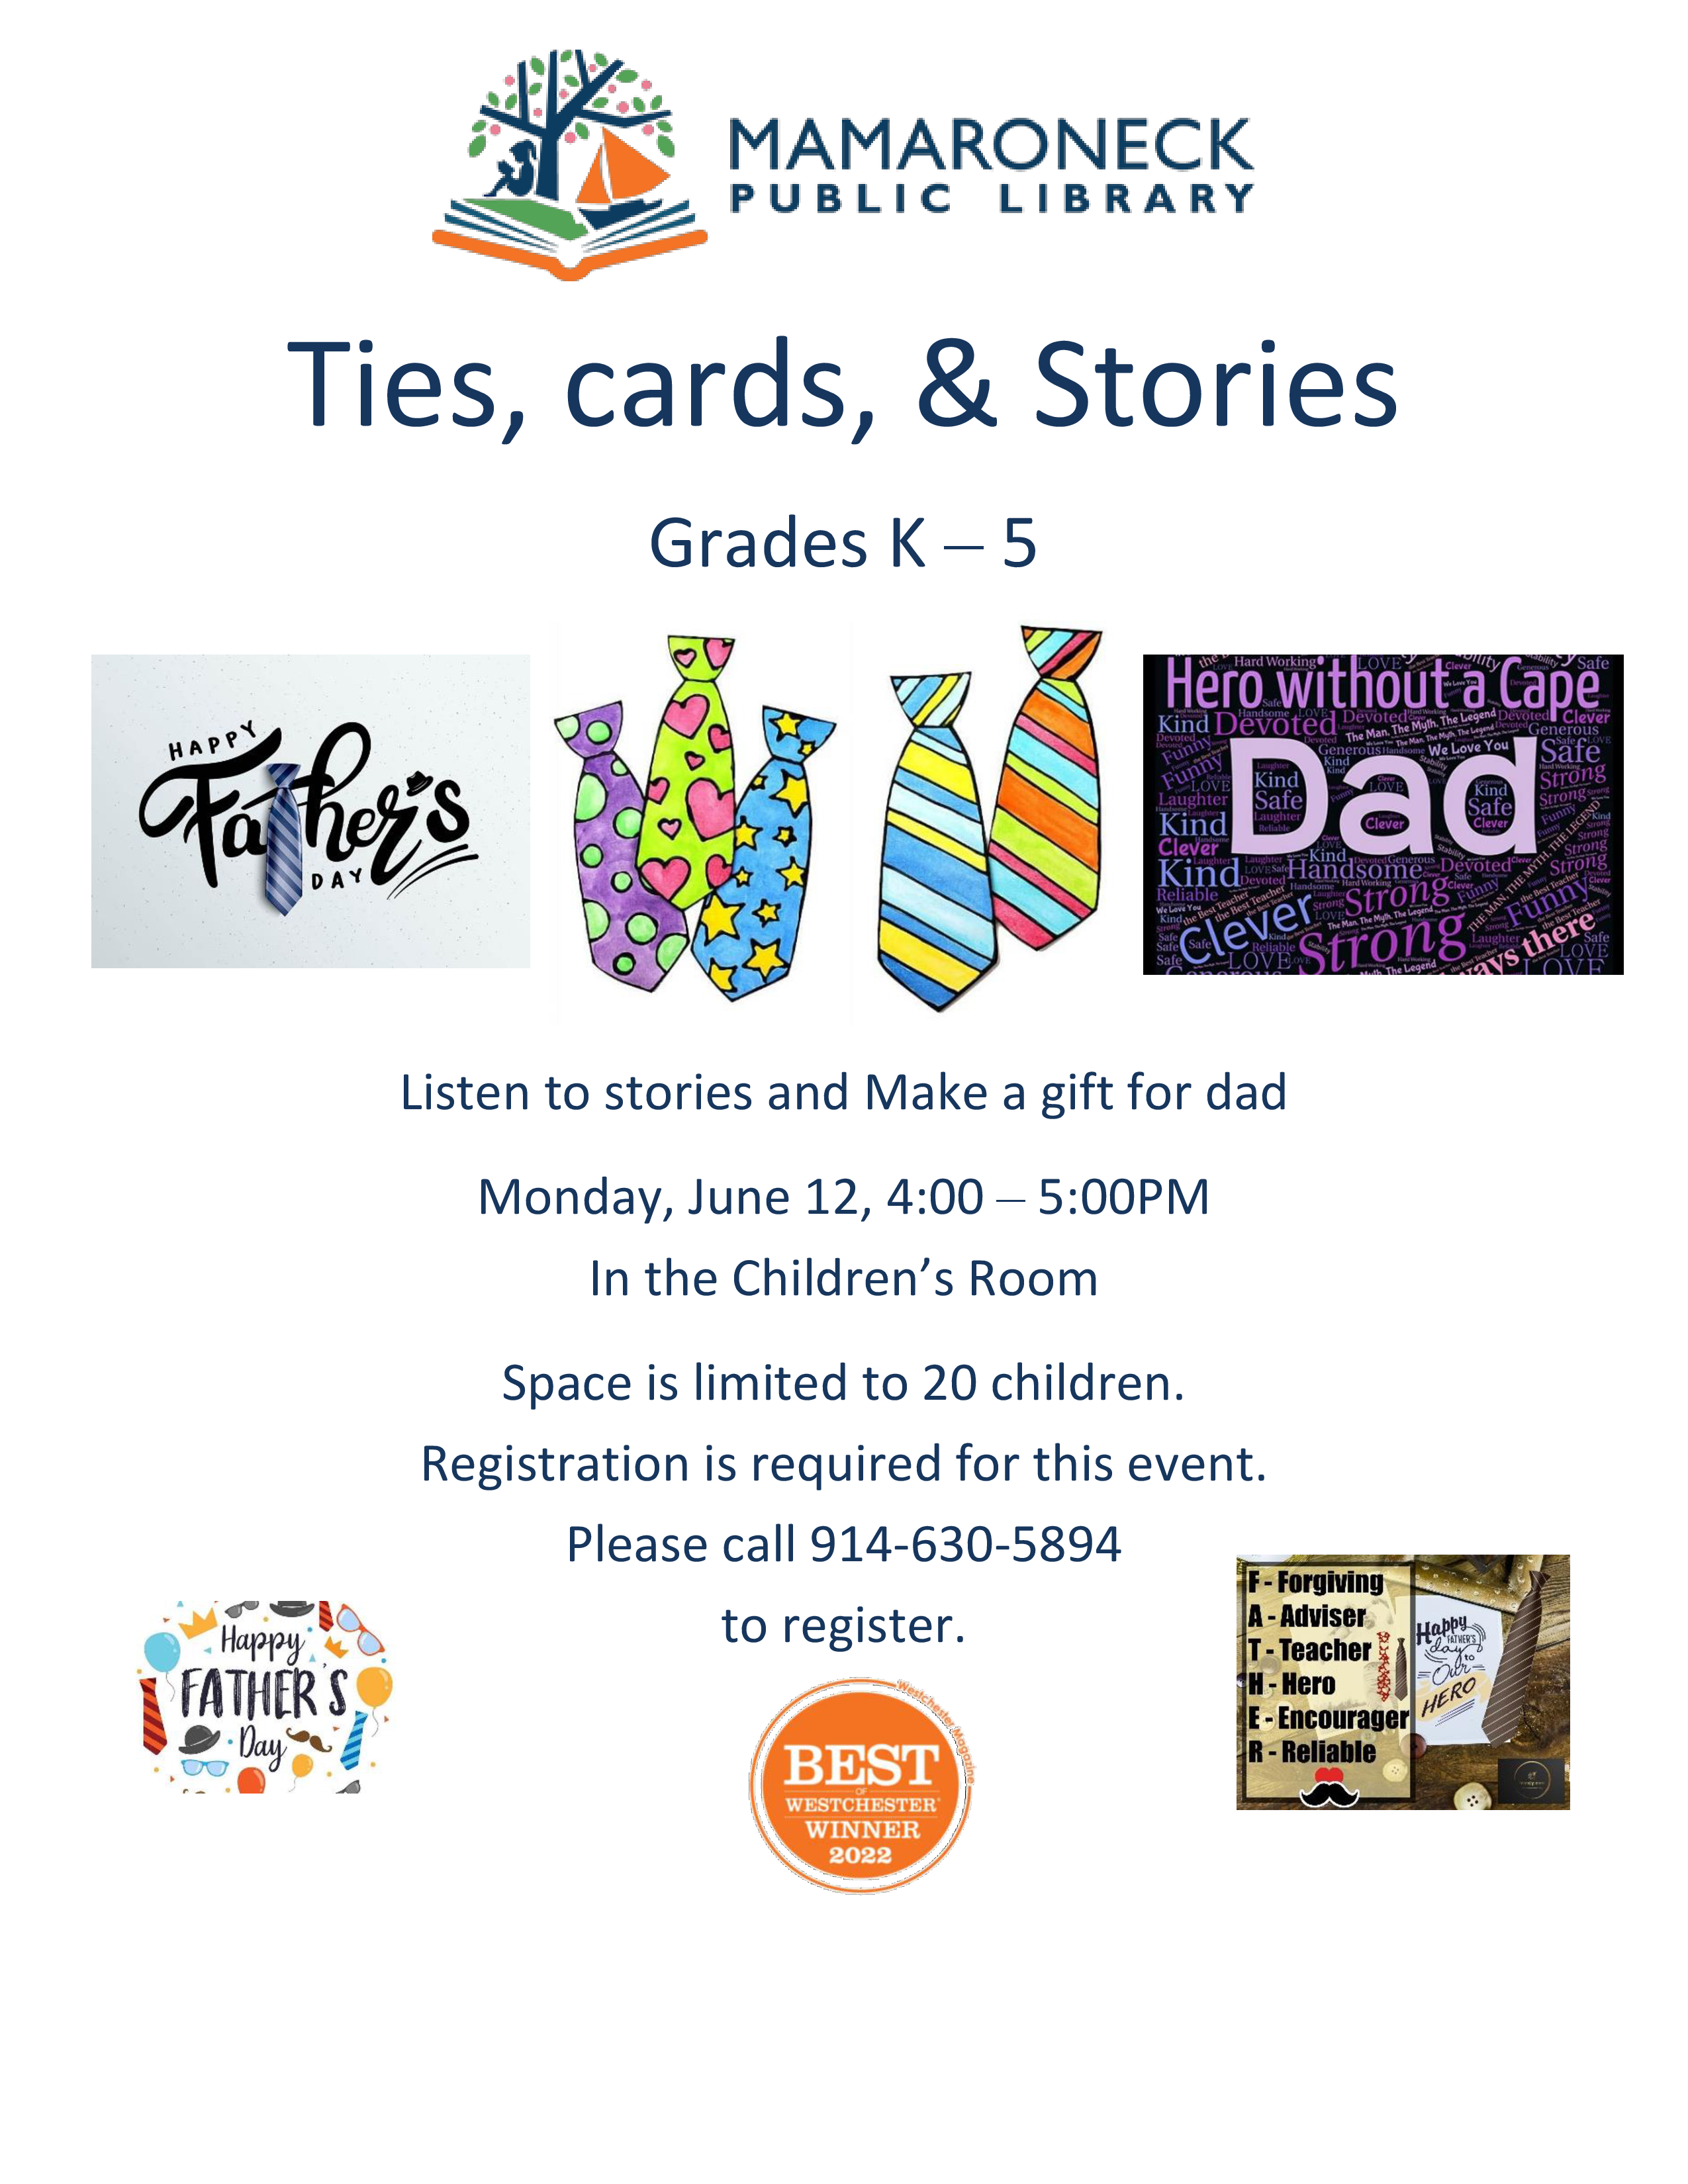 6/12 @ 4-5pm in the Children's Room - Ties, Cards, & Stories (grades K - 5) - Make a gift for Dad